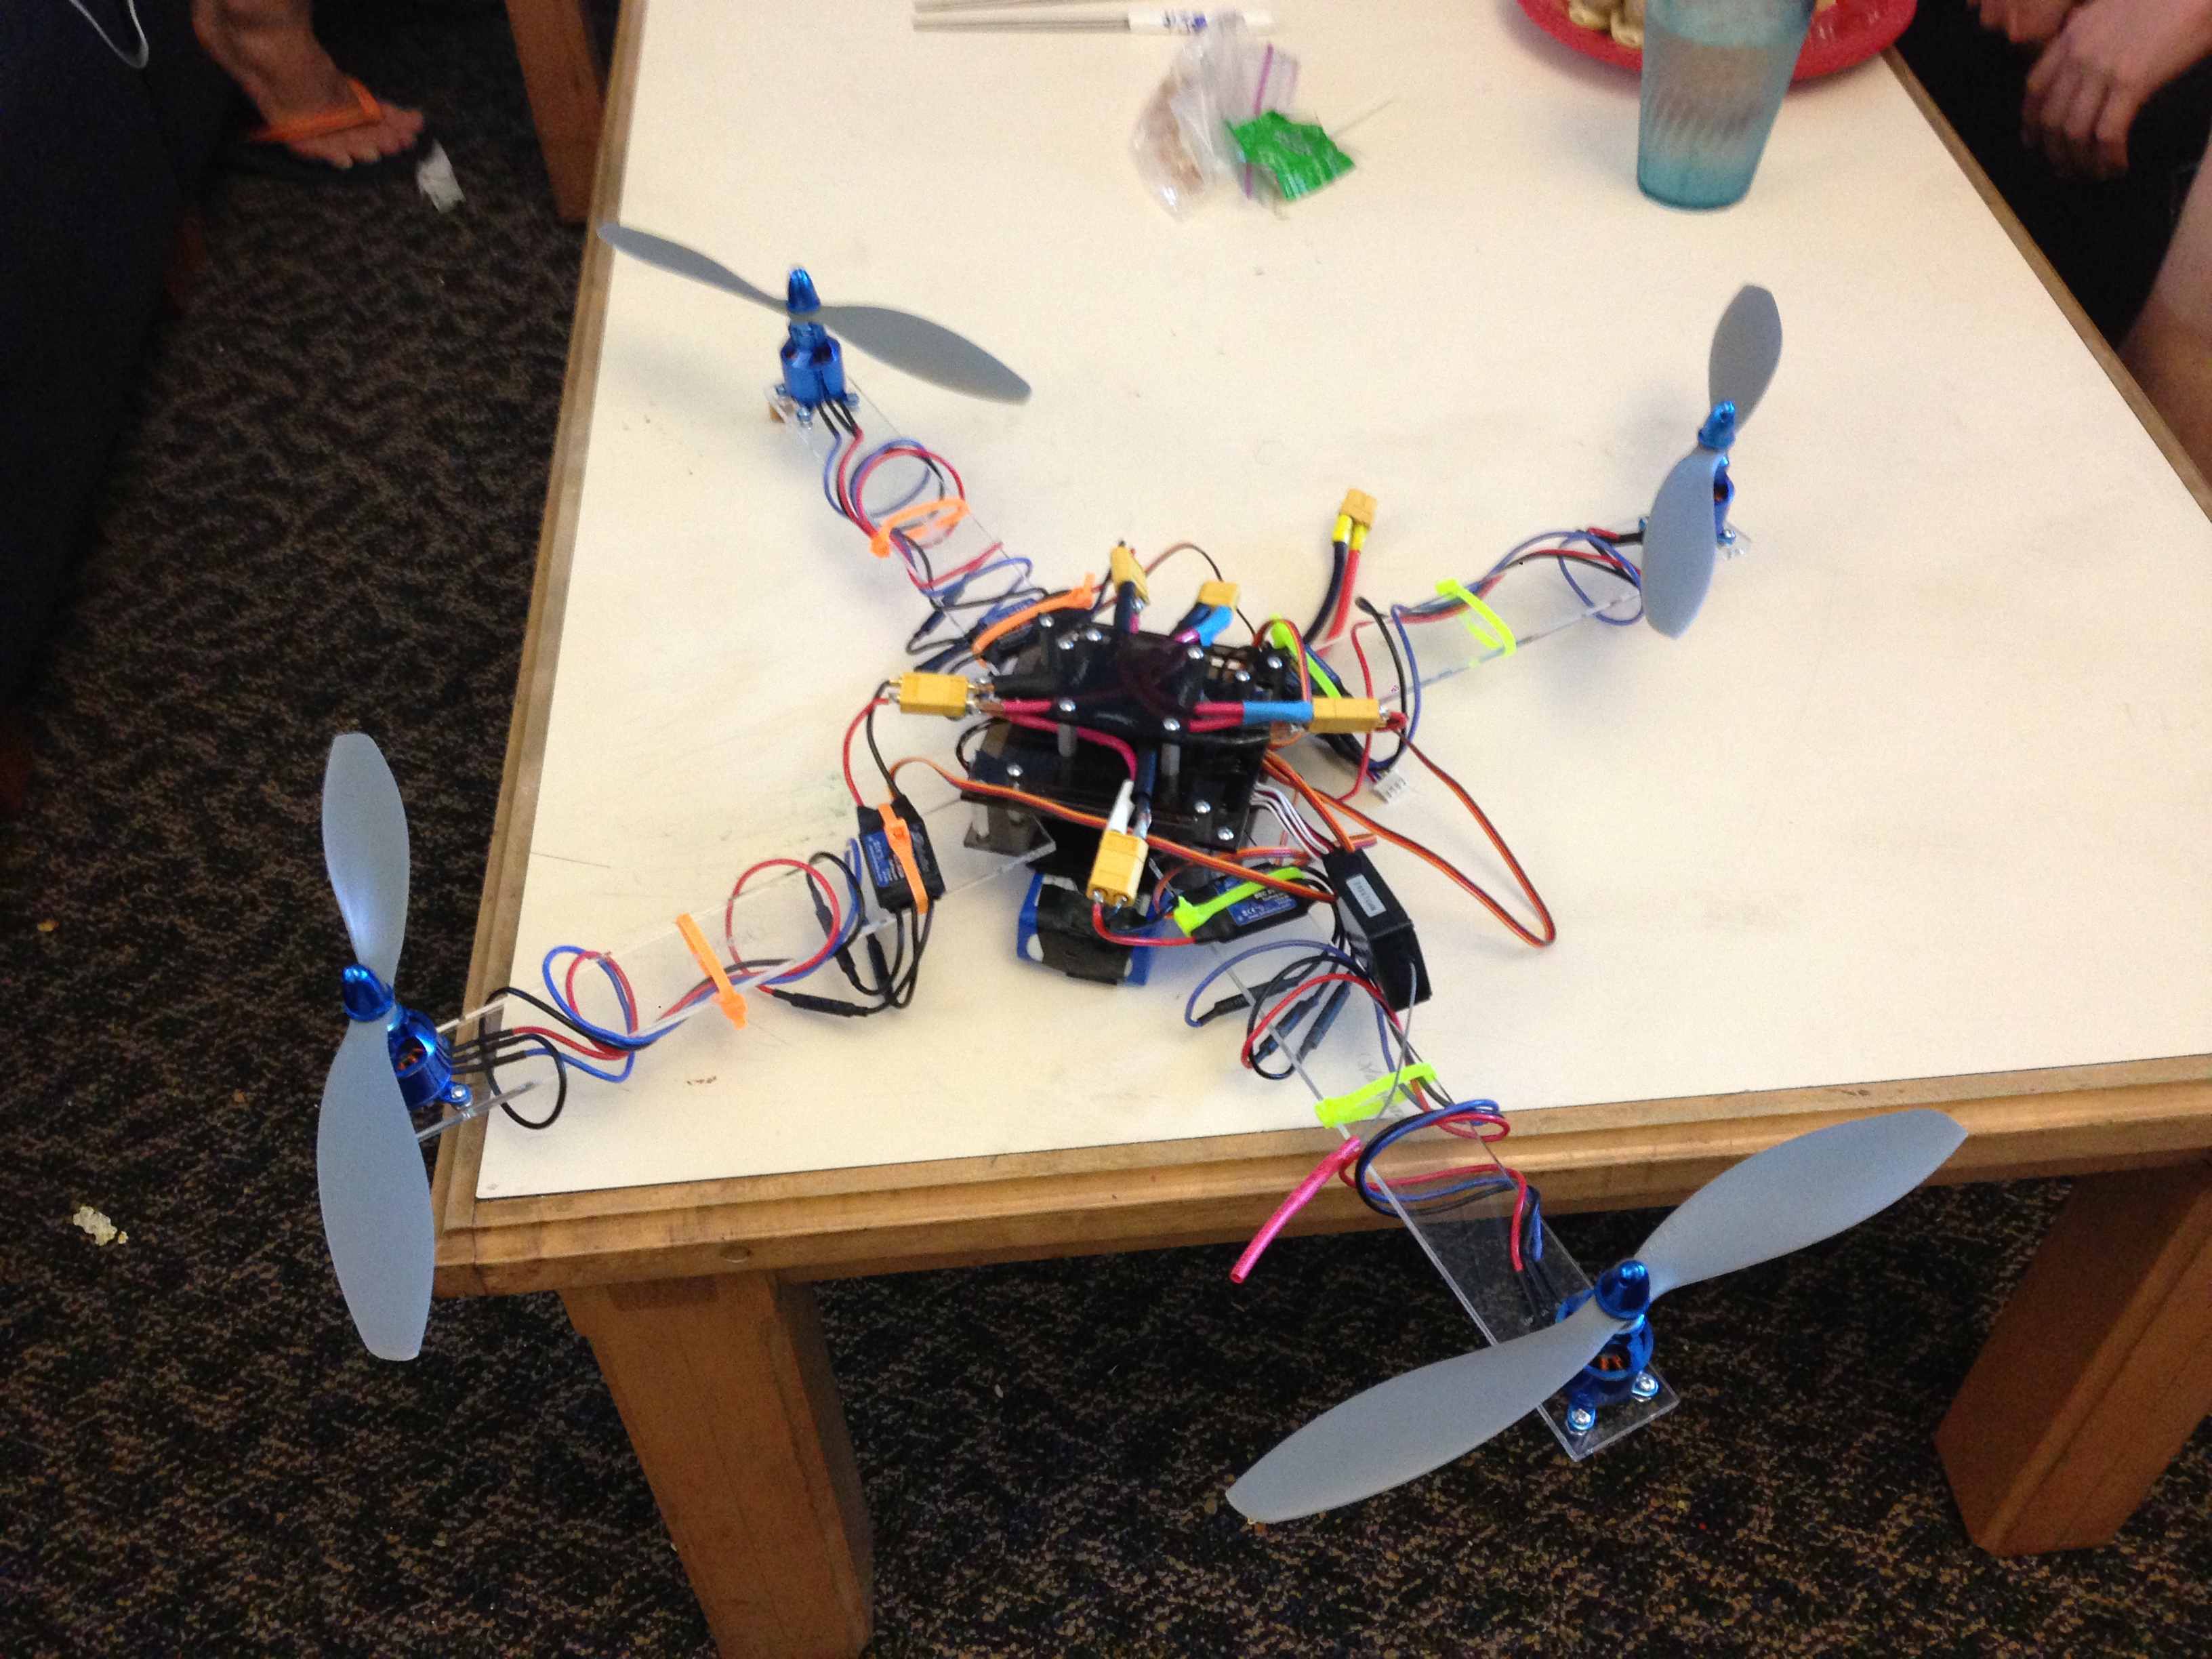 Scratch build your own quad-copter!